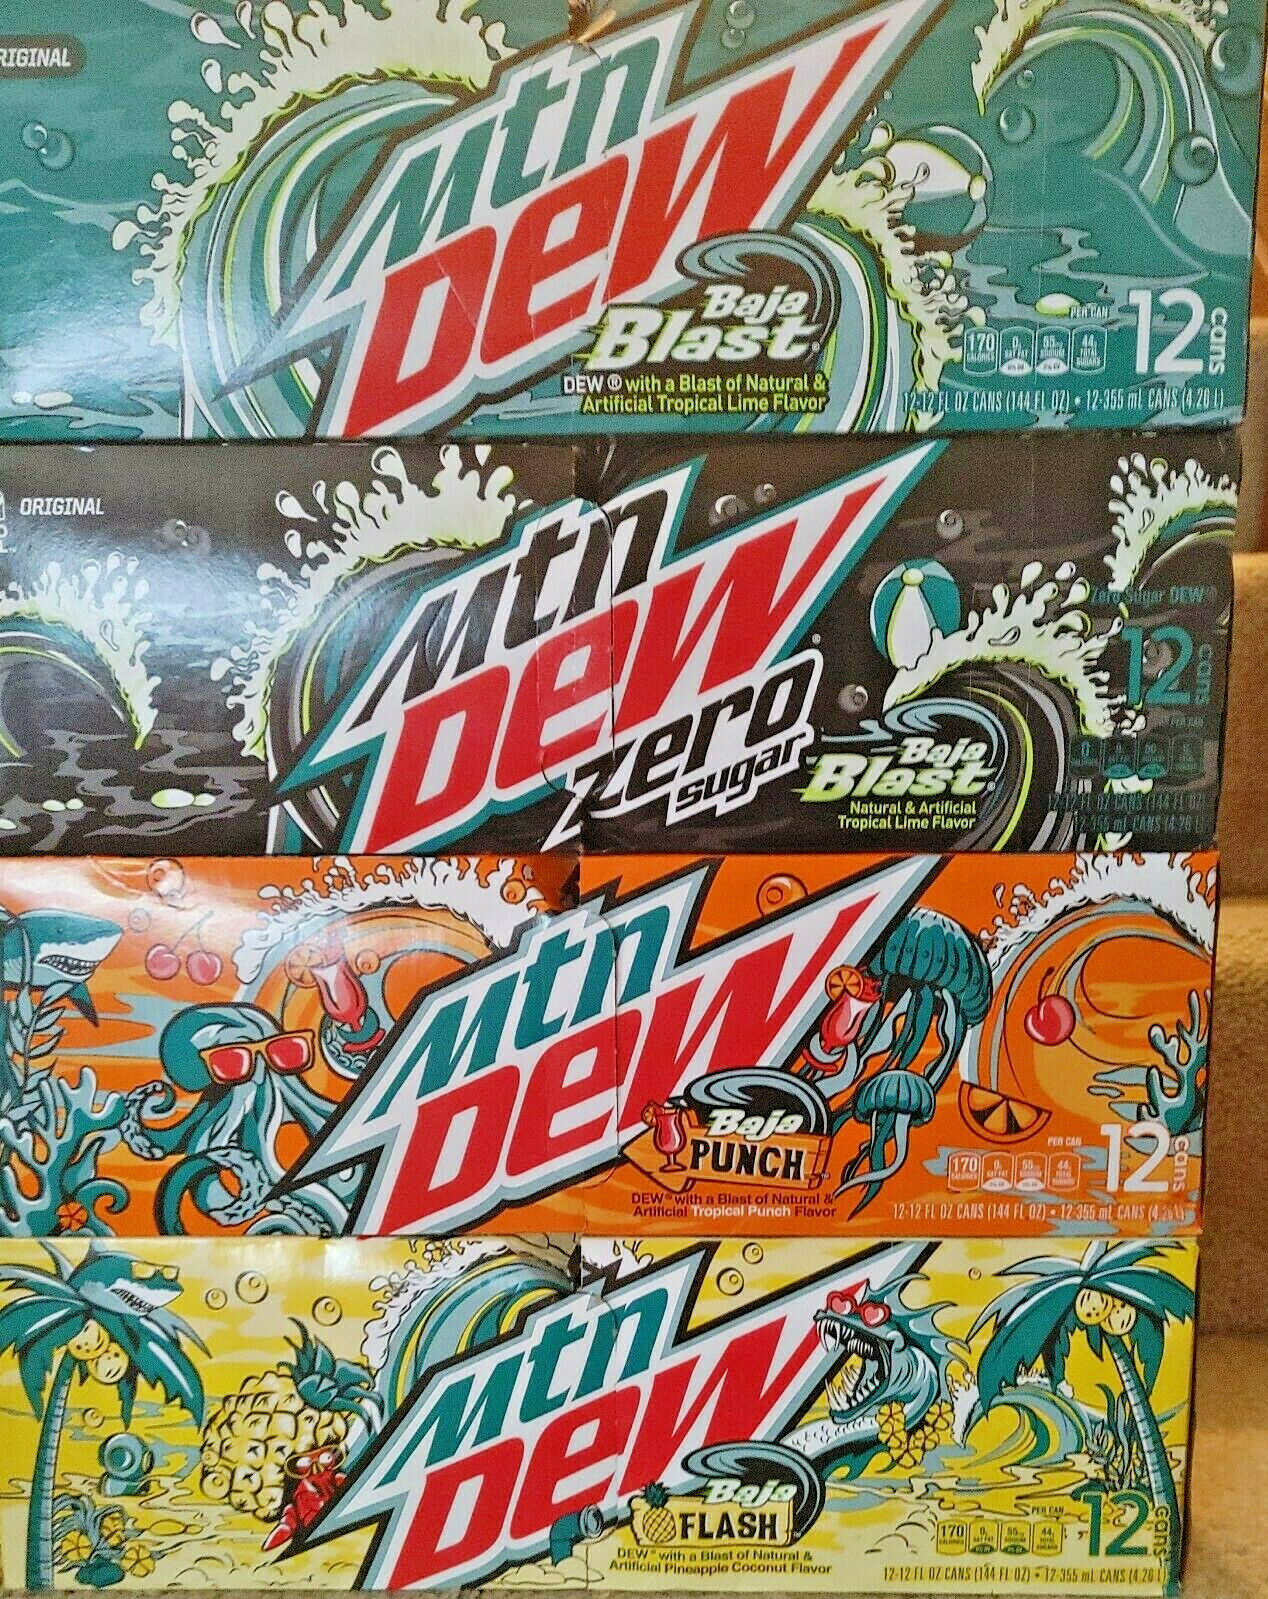 2021 Dew Baja Blast 12 packs with all NEW flavors +FREE SHIPPING. READ FULL DESC